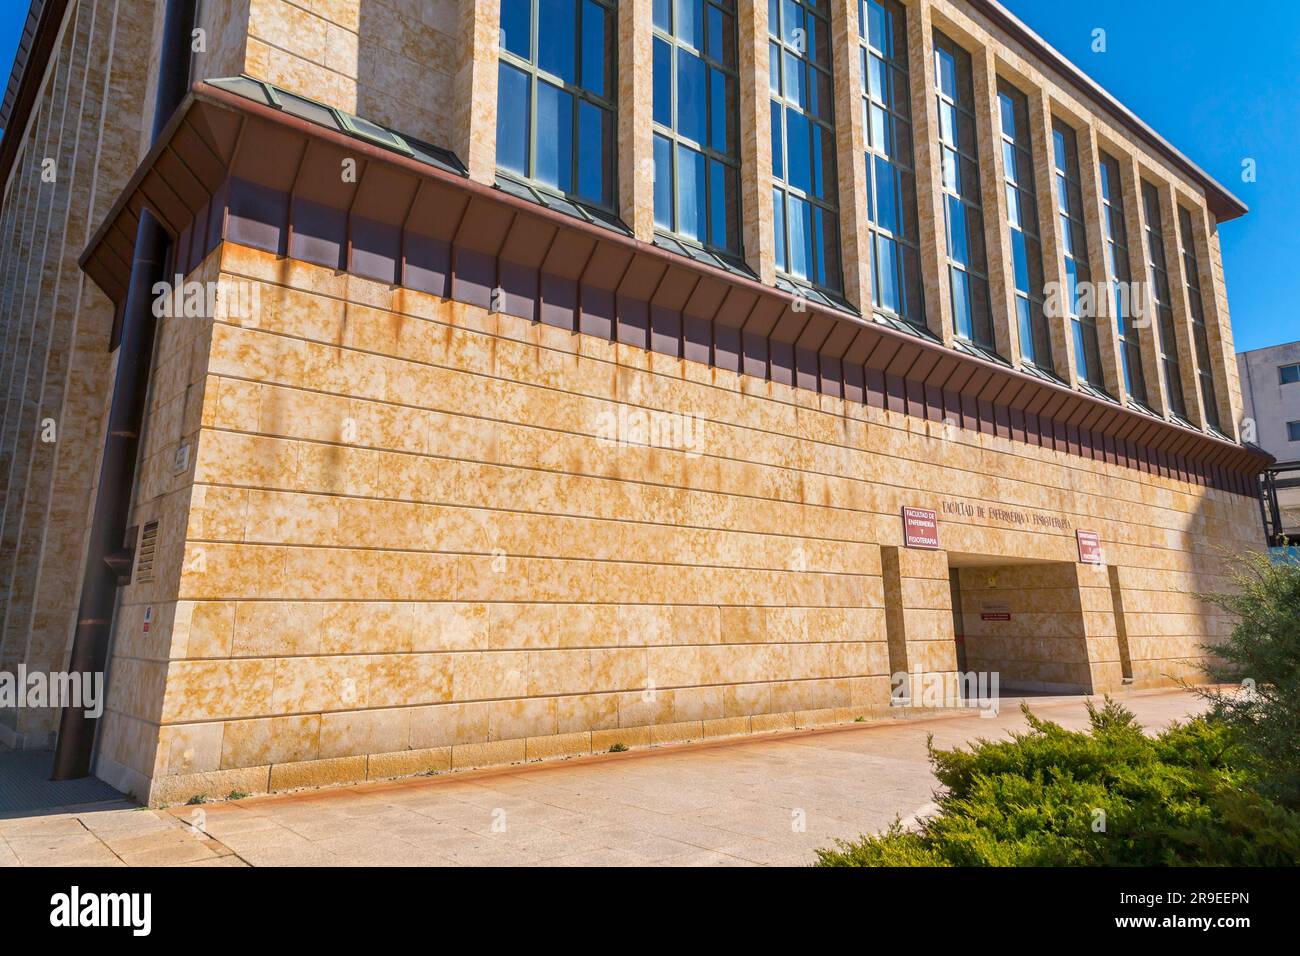 Salamanca, Spain - February 20, 2022: Exterior view of the Faculty of Infermary and Physiotherapy of Salamanca University, Castile and Leon, Spain. Stock Photo